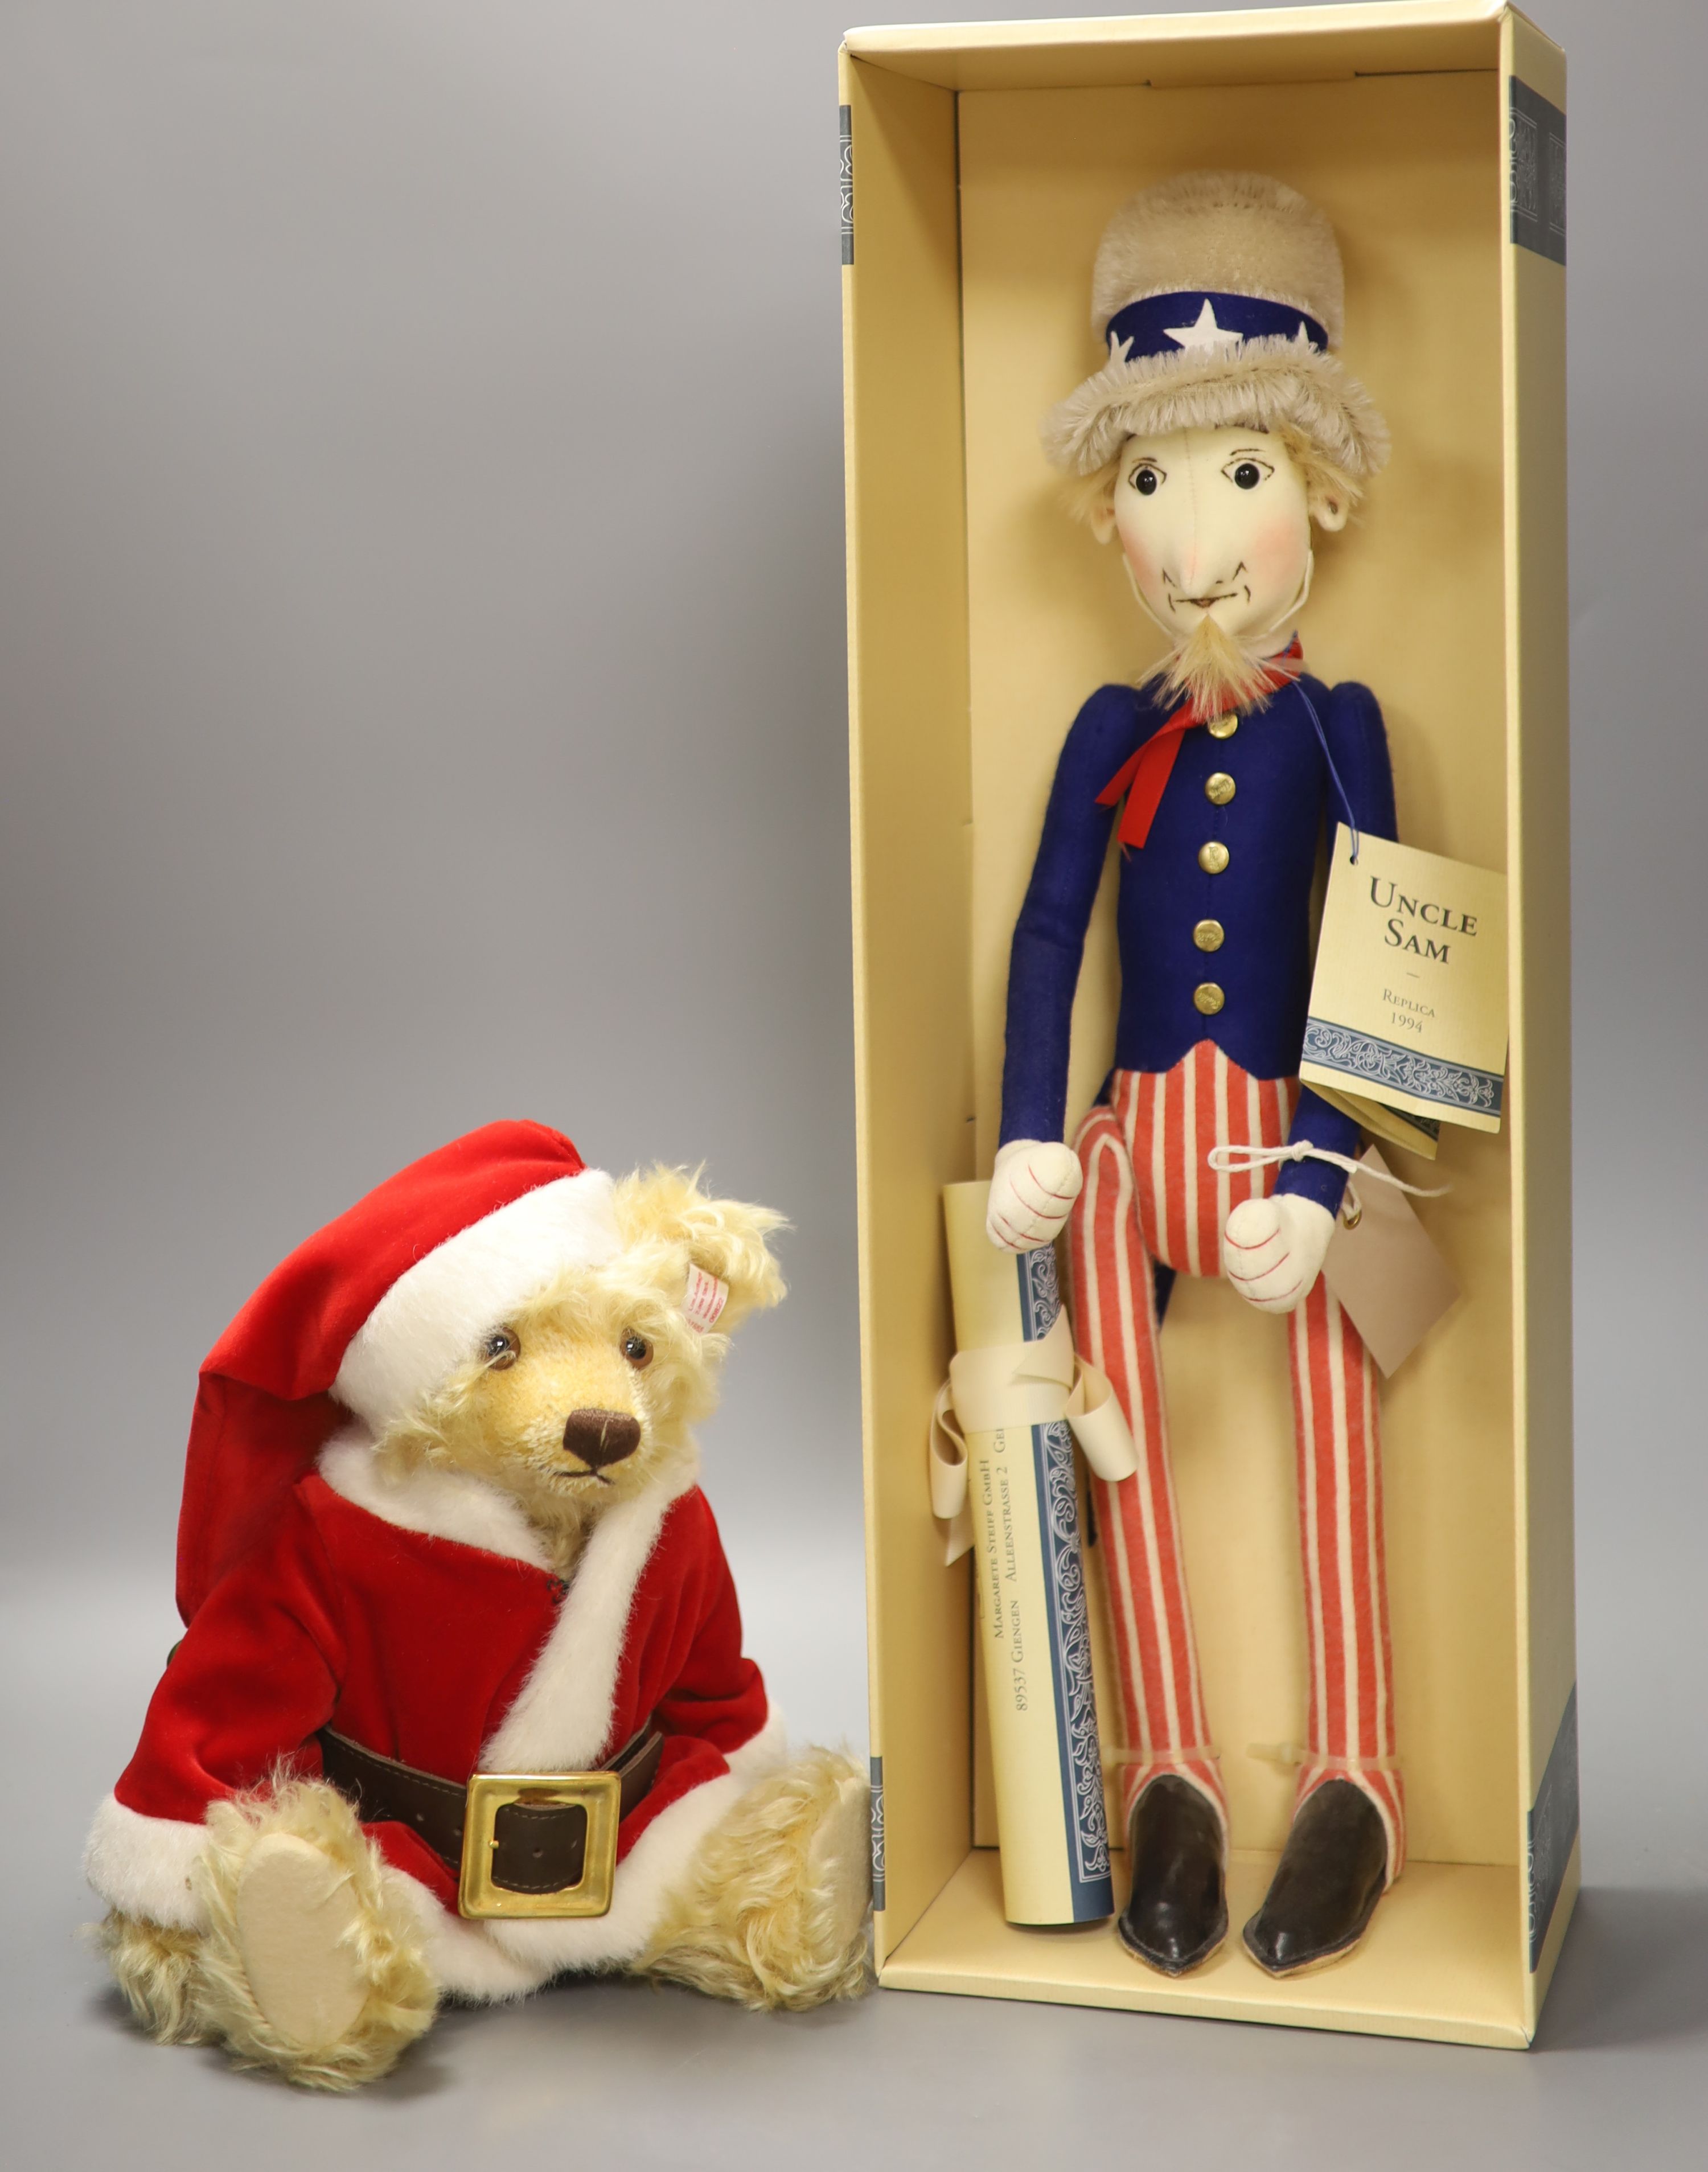 Steiff 'Uncle Sam' doll, box and certificate, Steiff Father Christmas bear limited edition, box